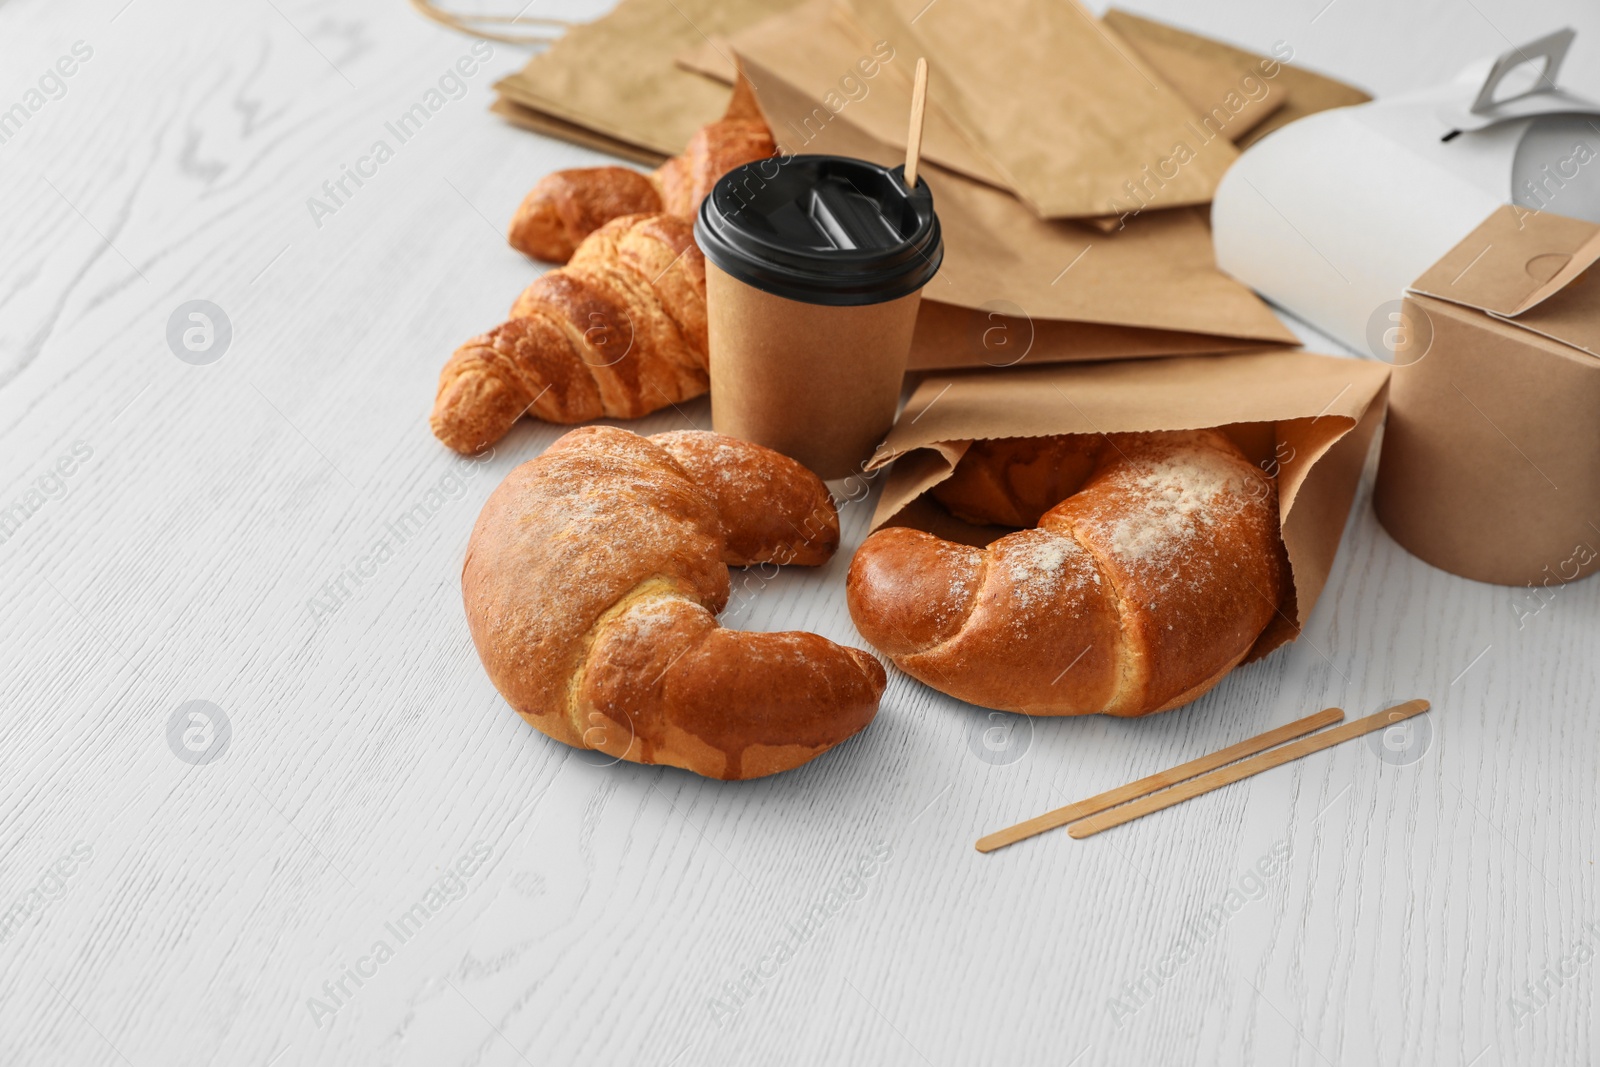 Photo of Paper bags with pastry and takeaway food on light table. Space for text